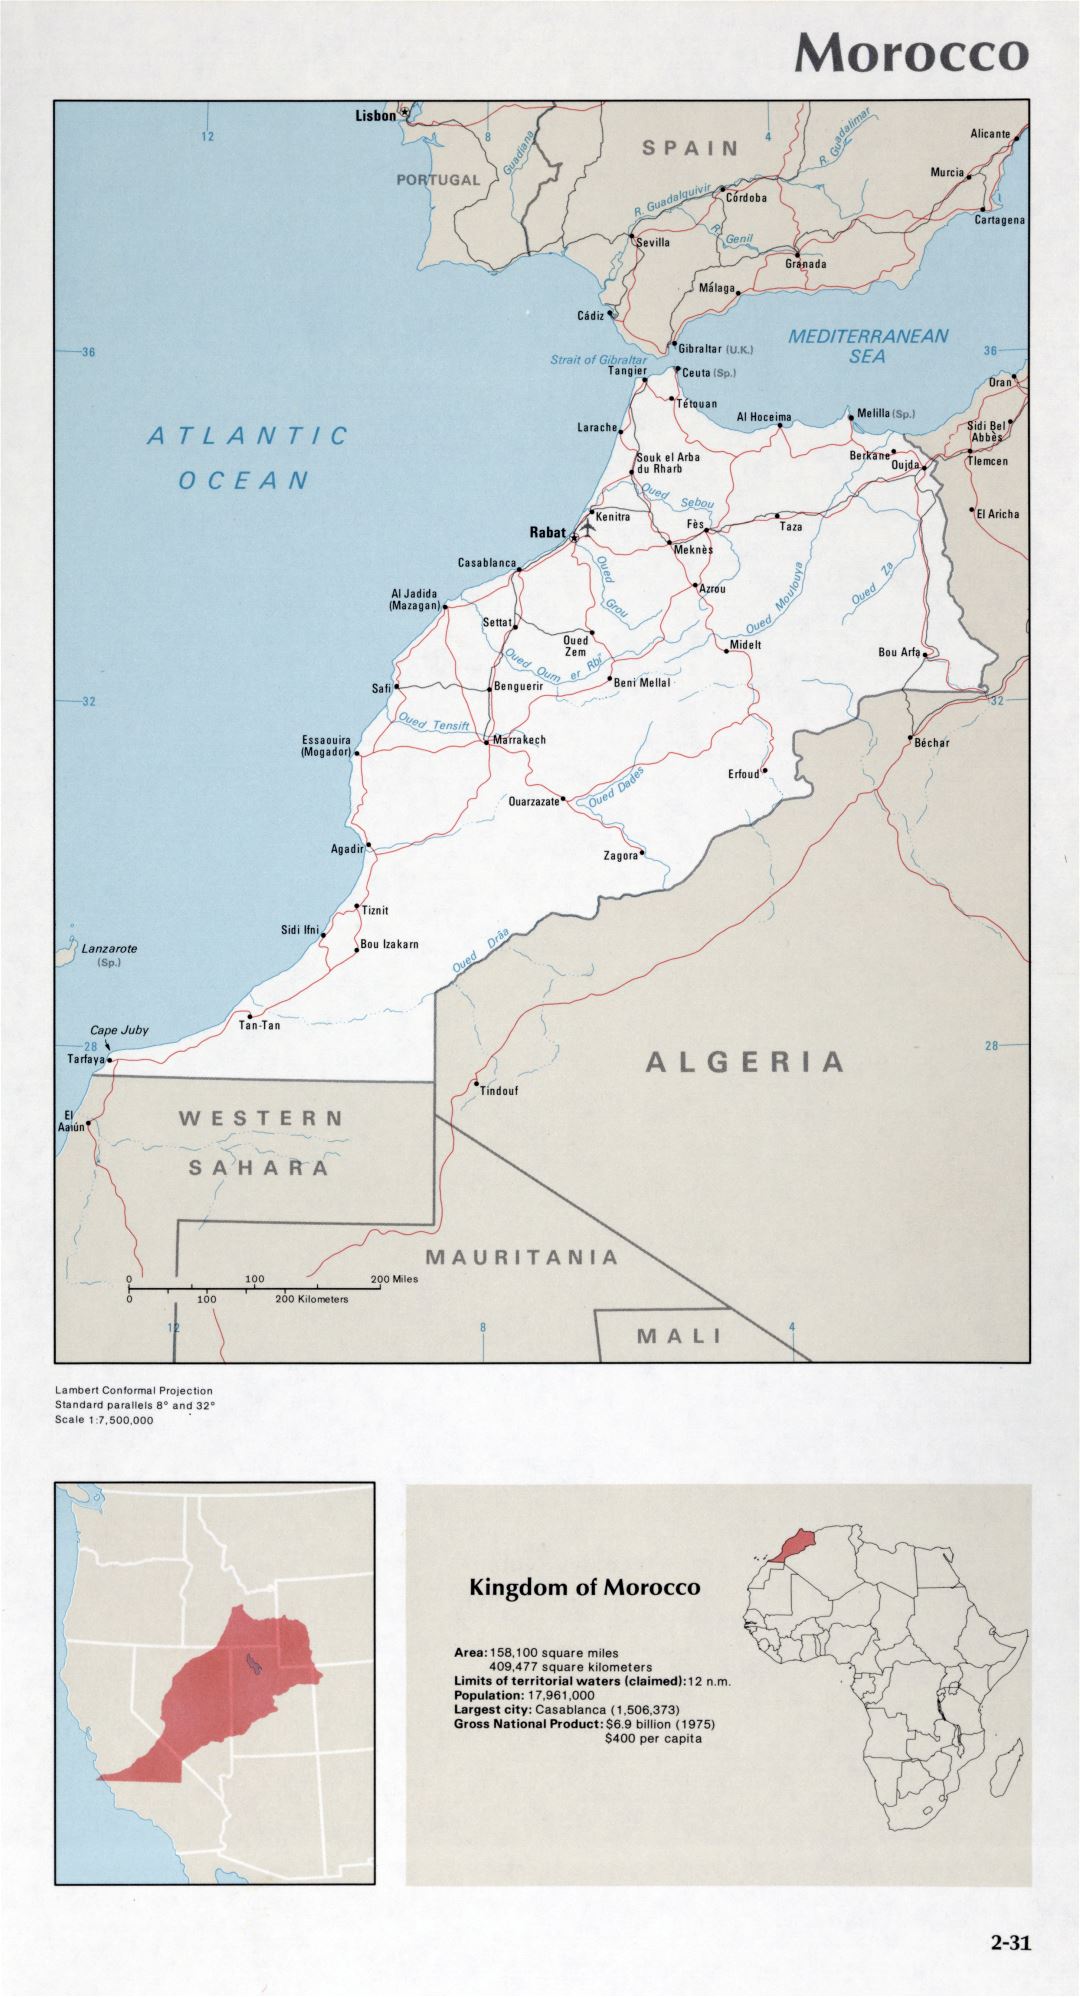 Map of Morocco (2-31)